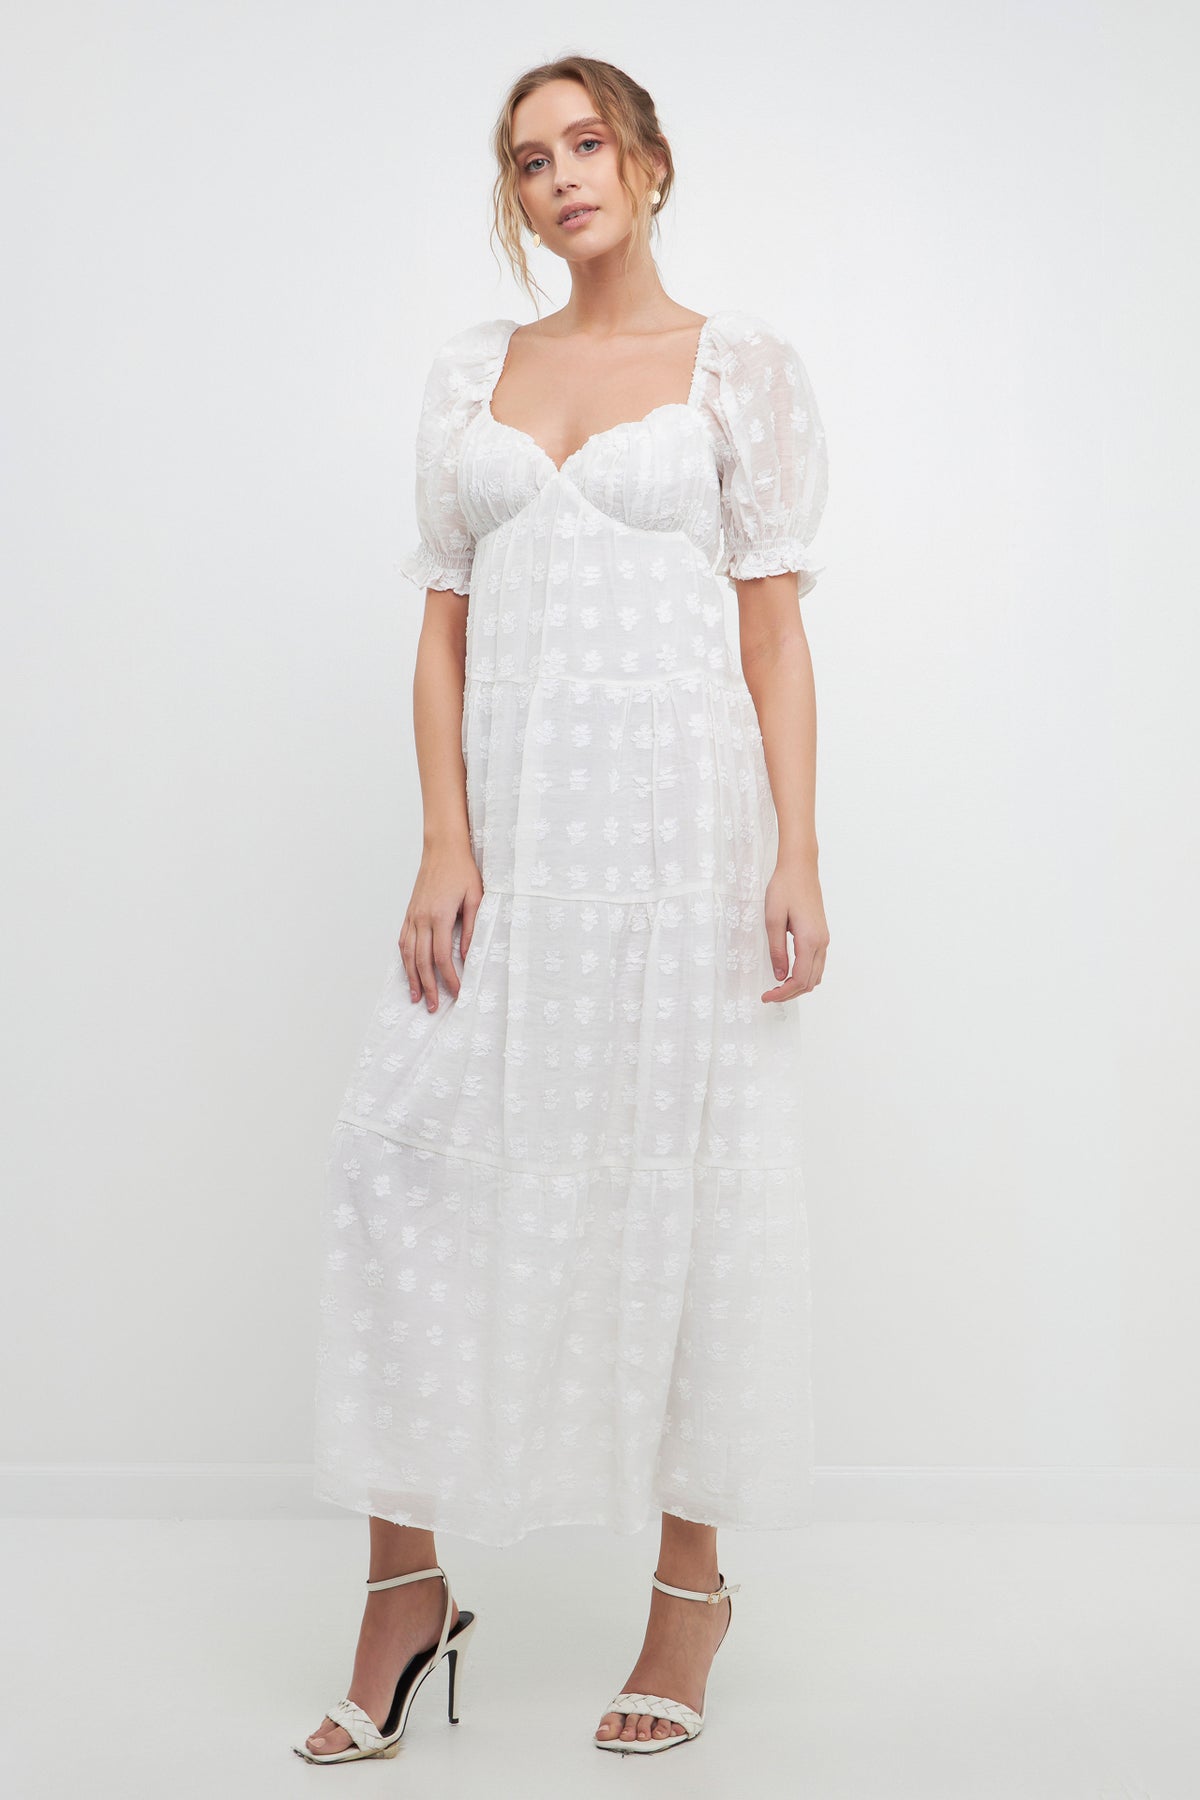 FREE THE ROSES - Sweetheart Tiered Short Sleeve Floral Maxi Dress - DRESSES available at Objectrare